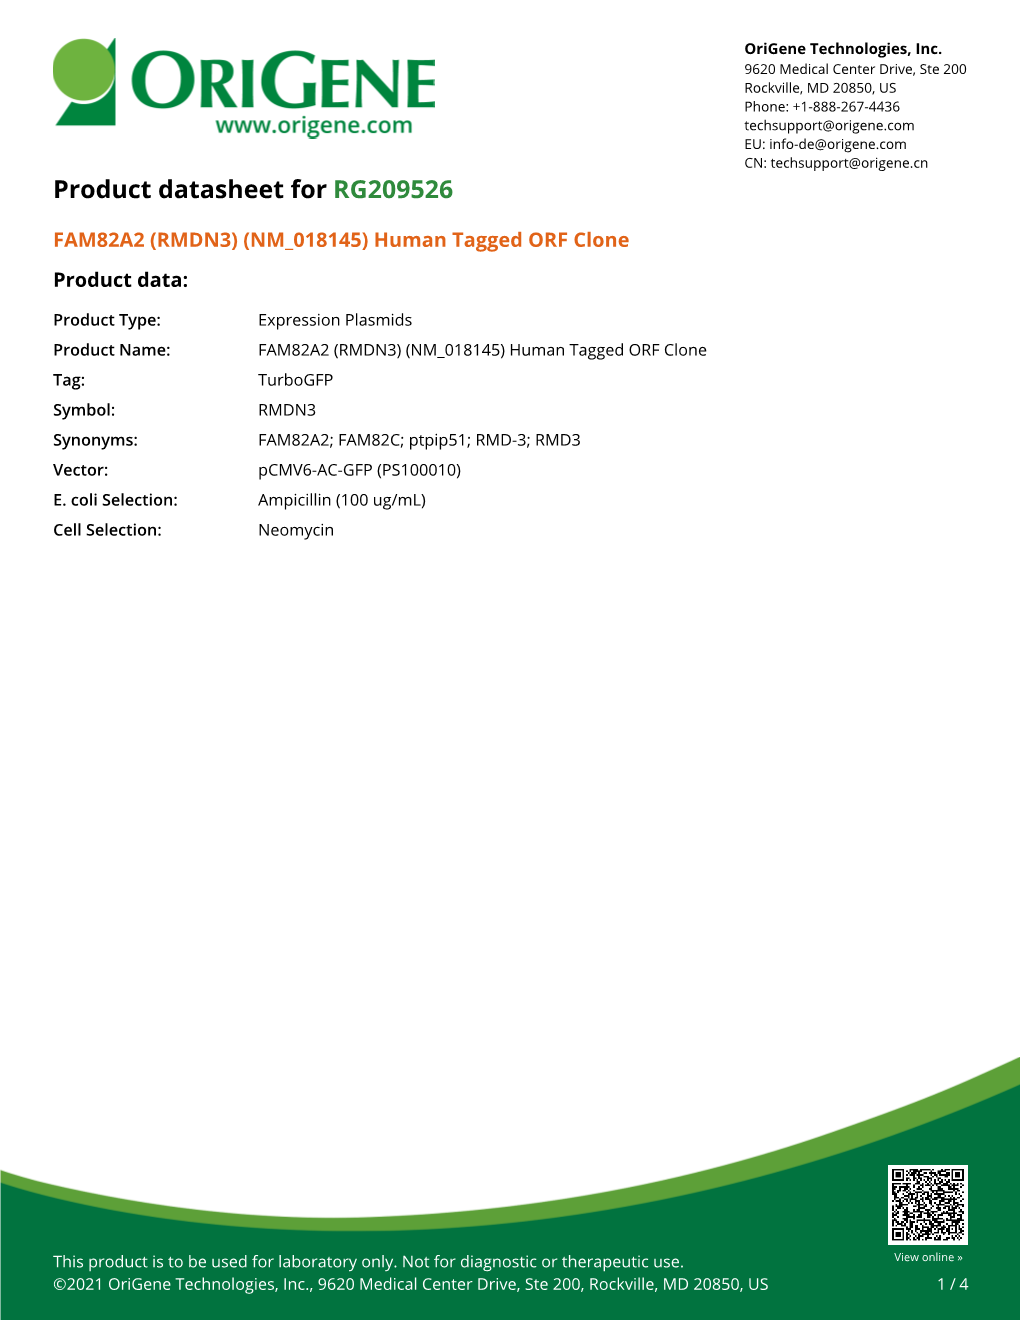 FAM82A2 (RMDN3) (NM 018145) Human Tagged ORF Clone Product Data